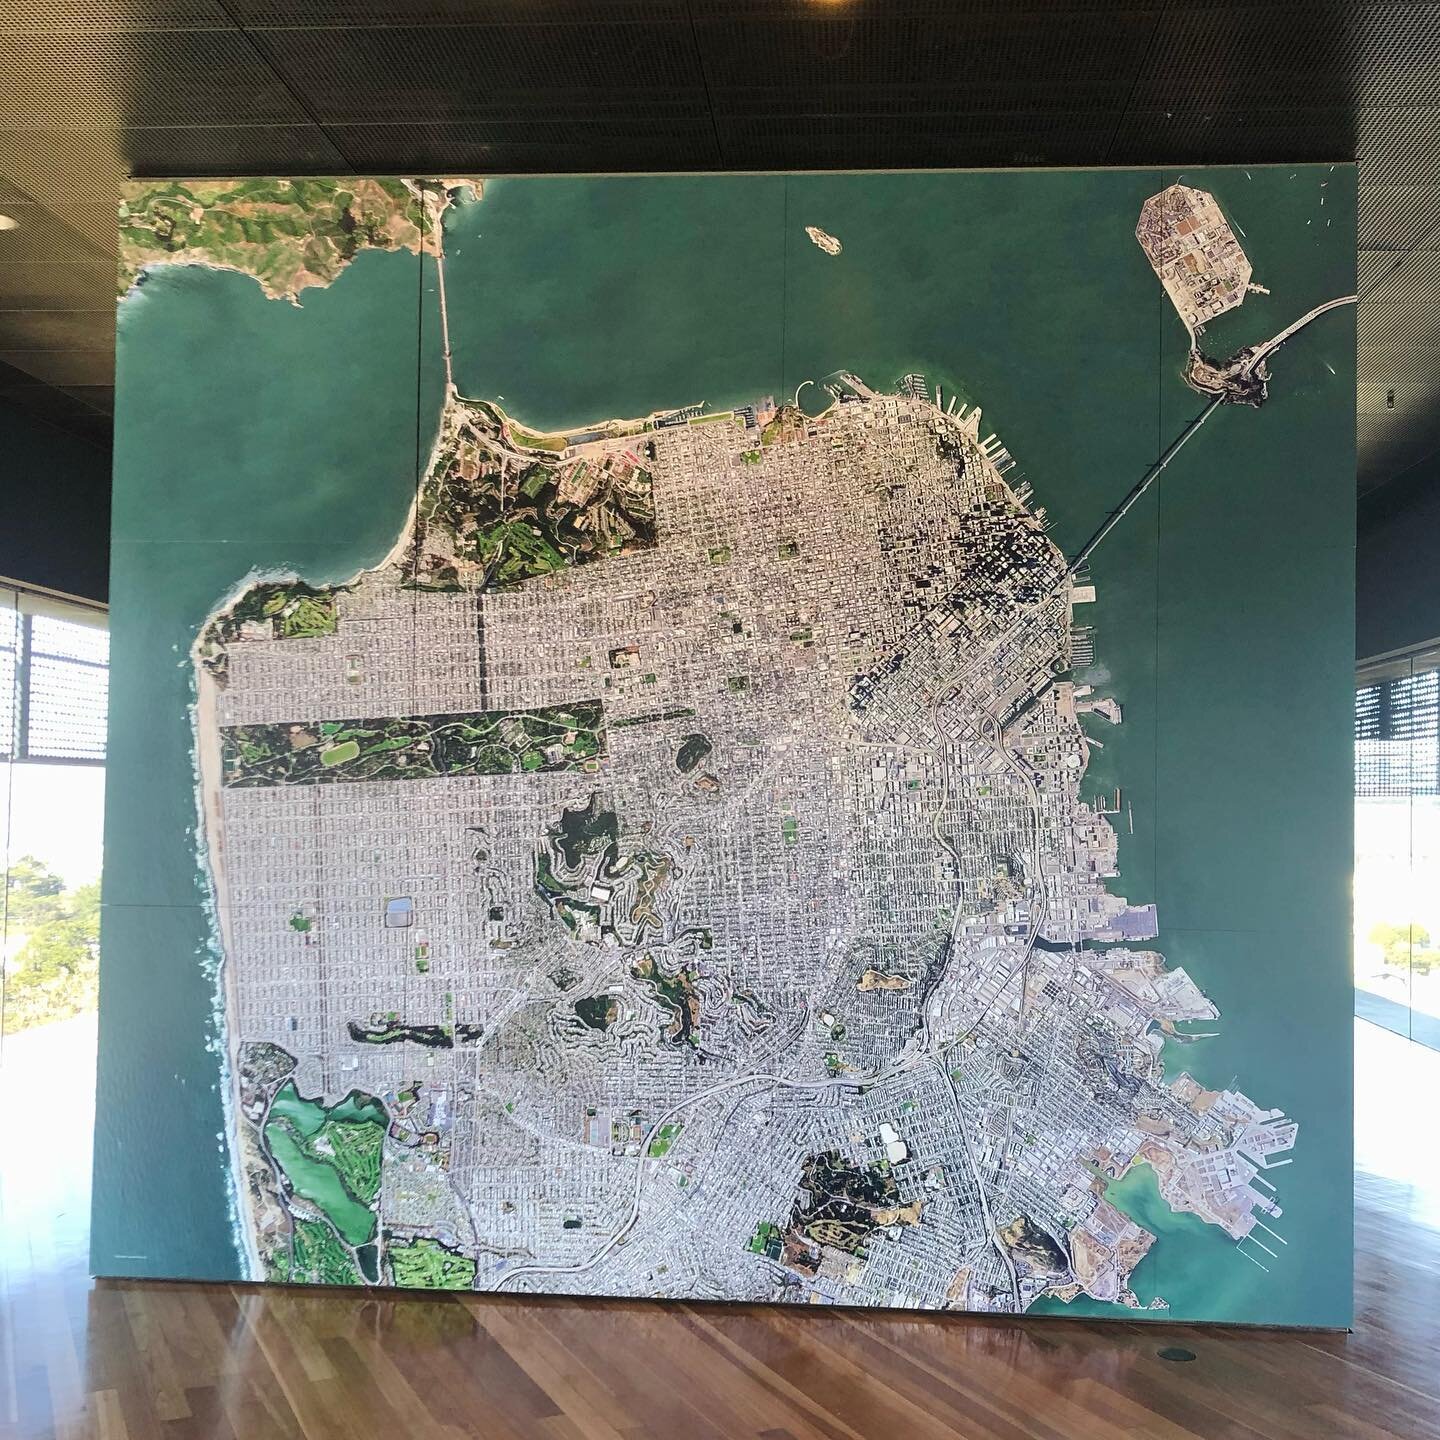 One of the BEST spots in #SF is the Hamon Observation Tower at the @deyoungmuseum - great views of the city and it&rsquo;s free!! Oh and it has a brand new satellite mural - the previous one was 17 years old! Go check it out on a sunny day!  Always a